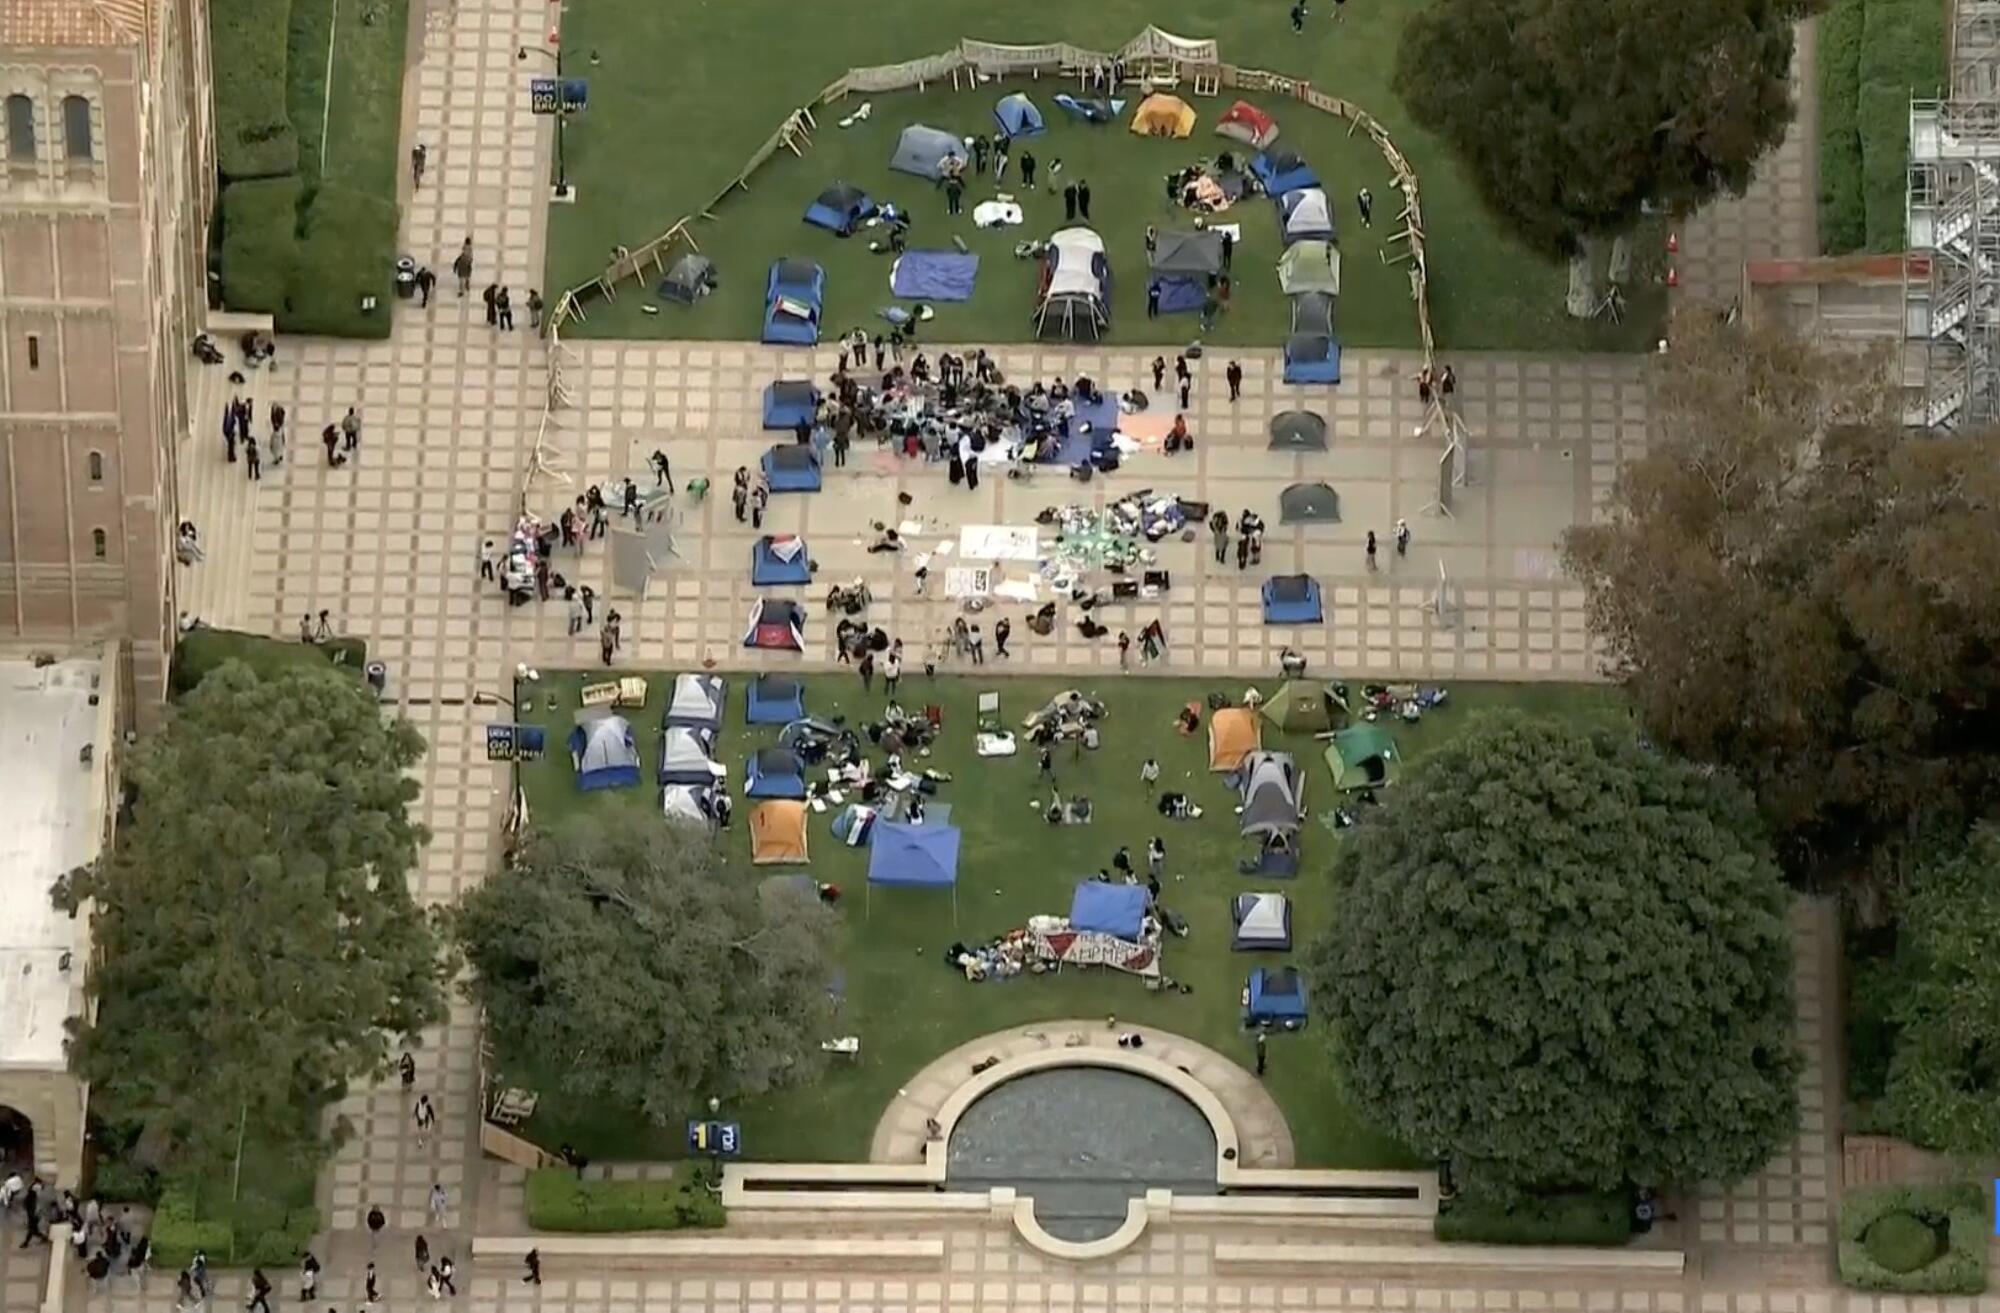 Pro-Palestinian protesters form an encampment outside UCLA's Royce Hall.